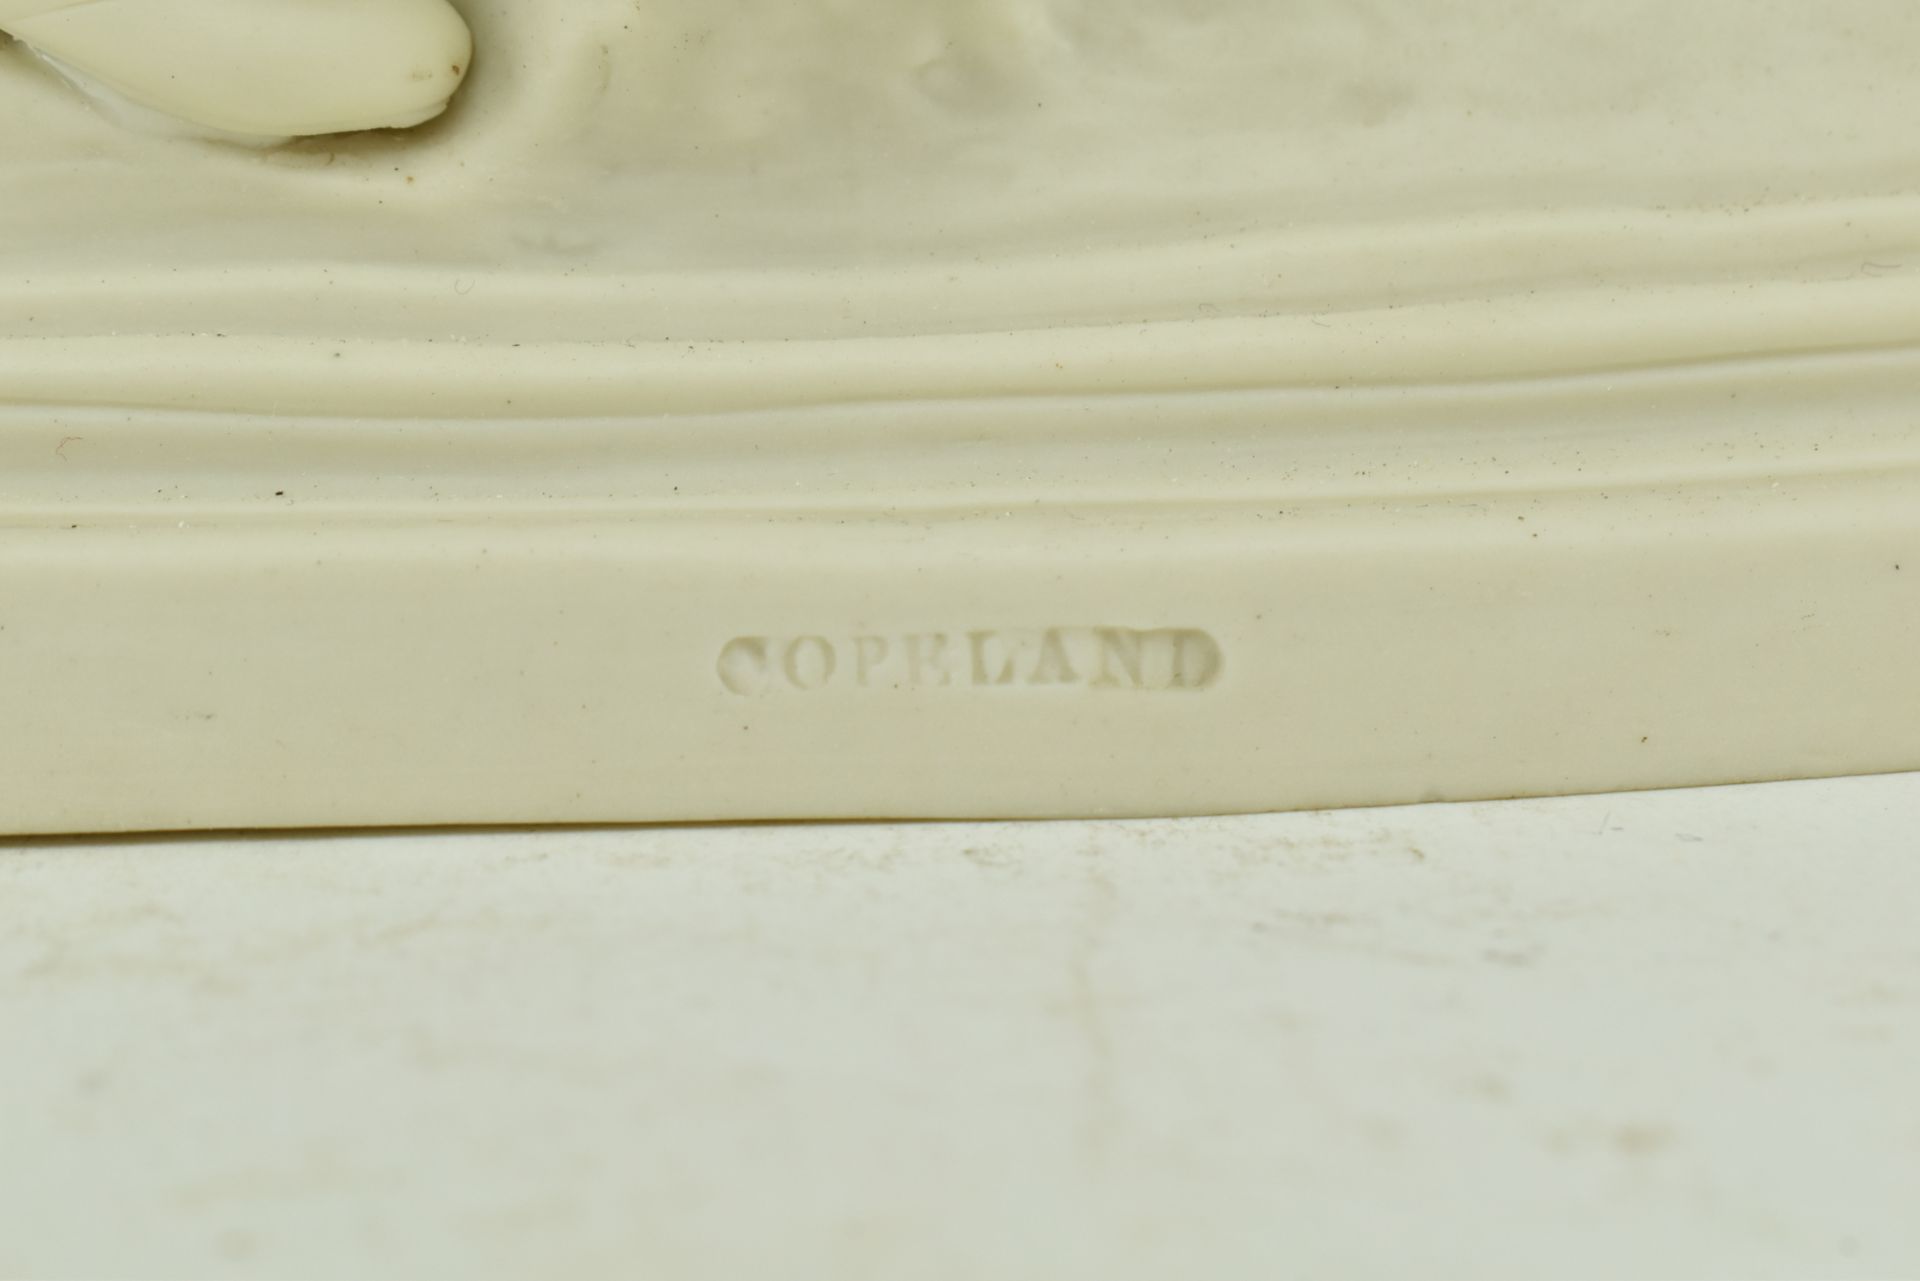 COPELAND AFTER P J. MENE - PARIAN WARE HUNTING FIGURE - Image 6 of 7